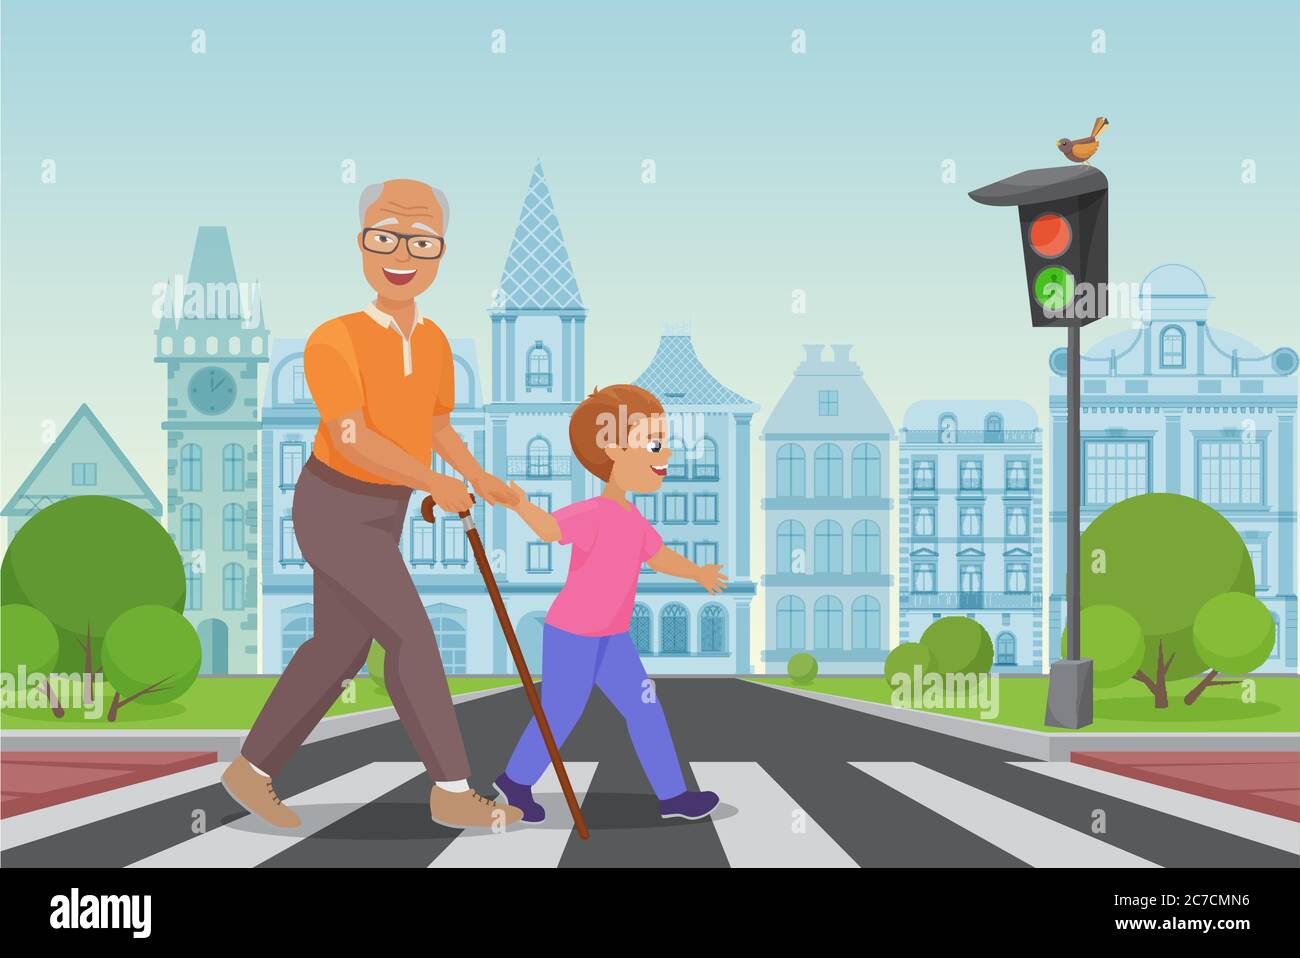 Helping old man. Little boy helps an old man to cross the road in city vector illustration Stock Vector